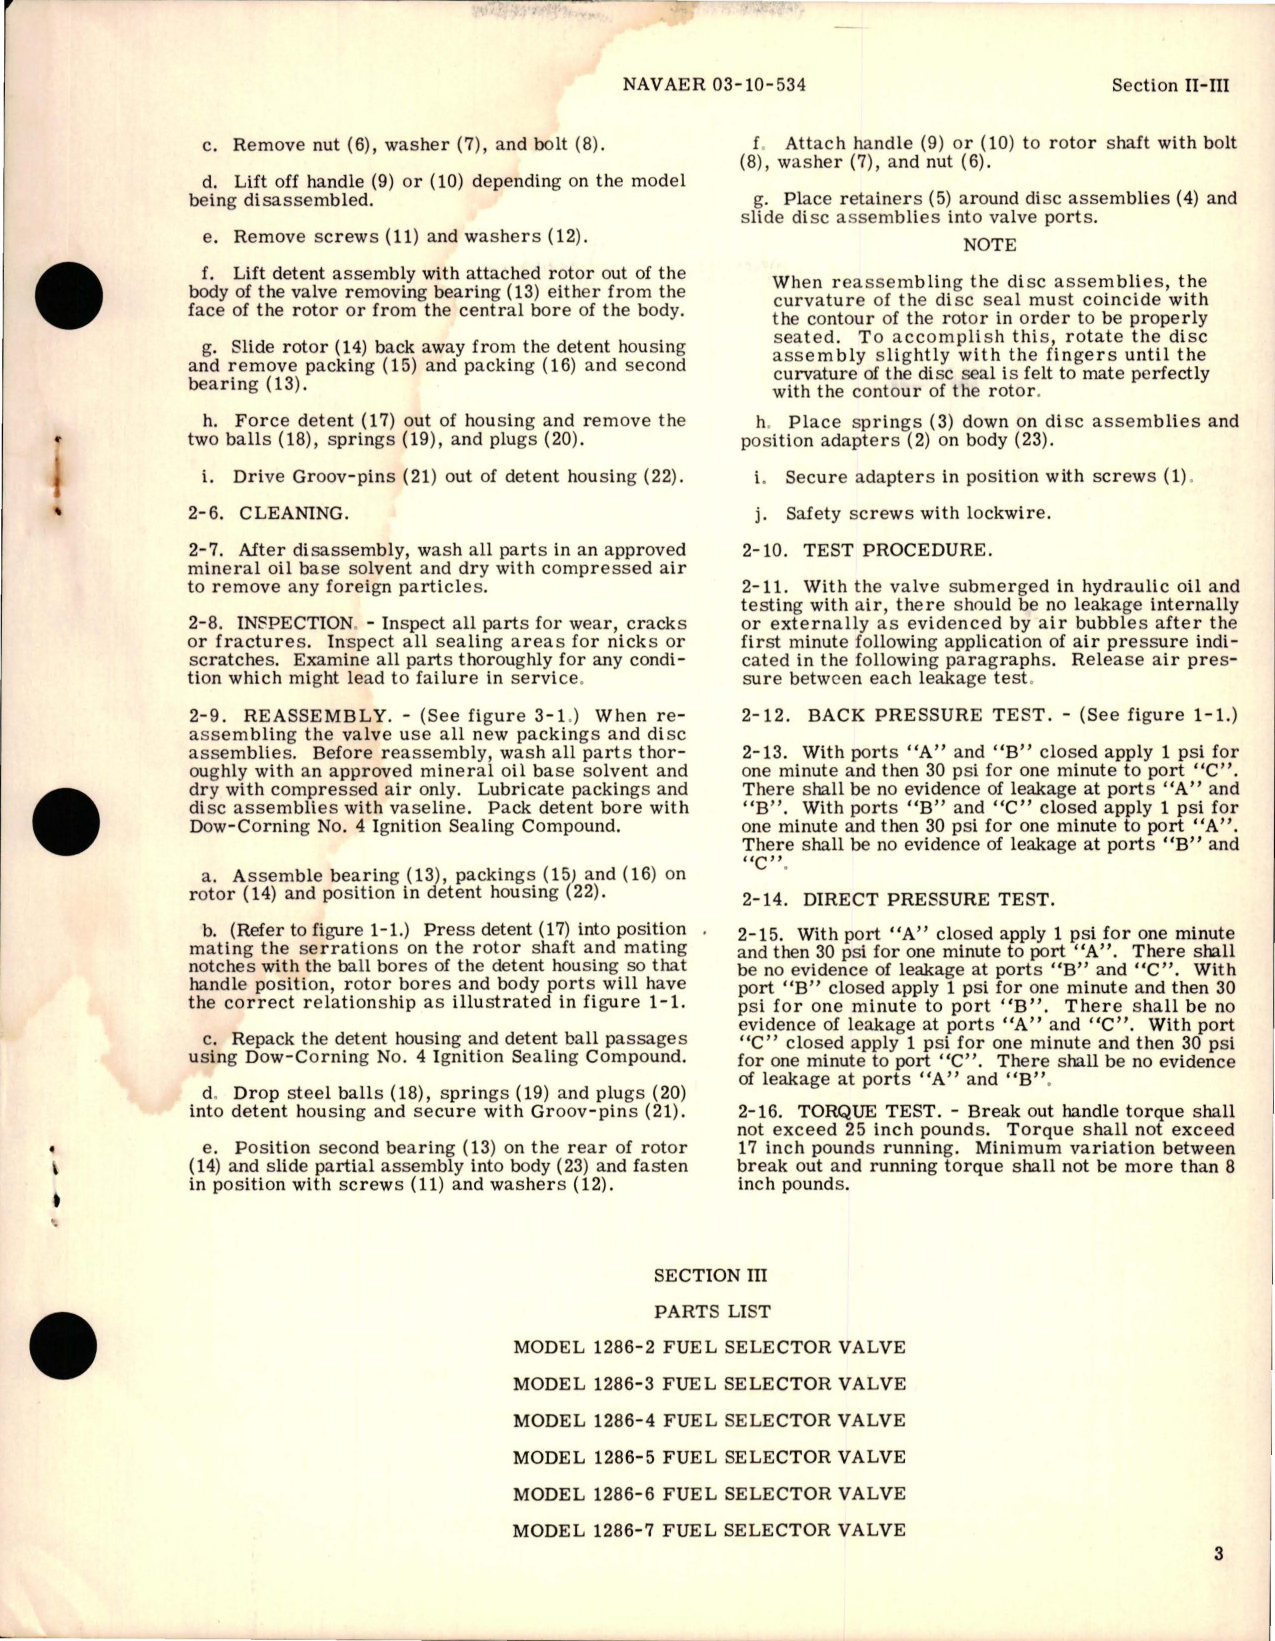 Sample page 5 from AirCorps Library document: Operation, Service and Overhaul Instructions for Fuel Selector Valves 